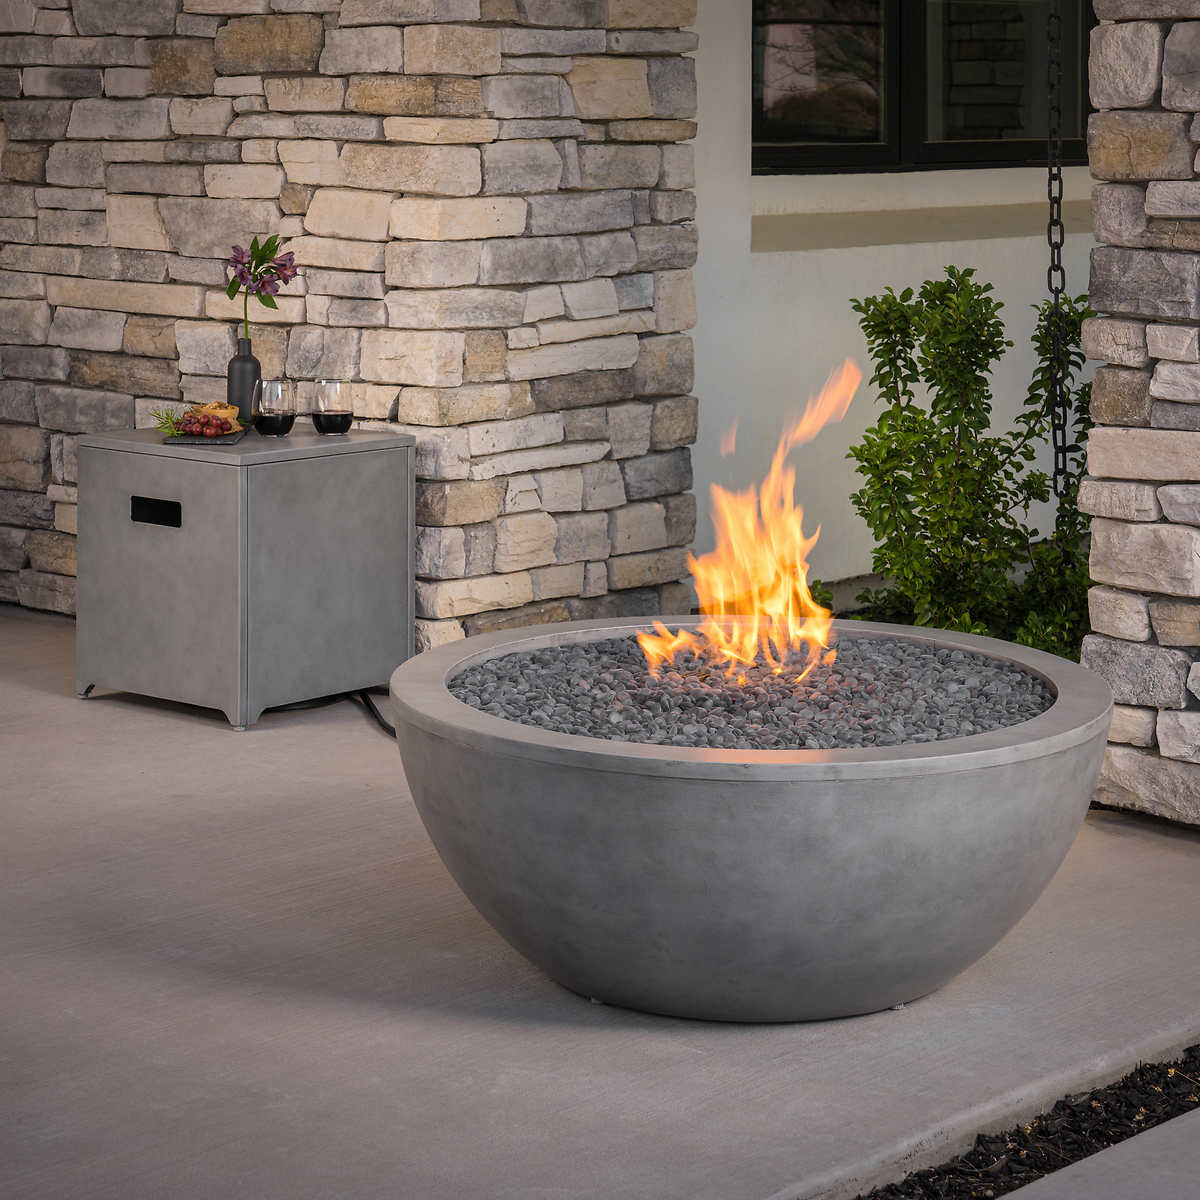 Corning Aluminum Fire Bowl with Tank Cover | Costco